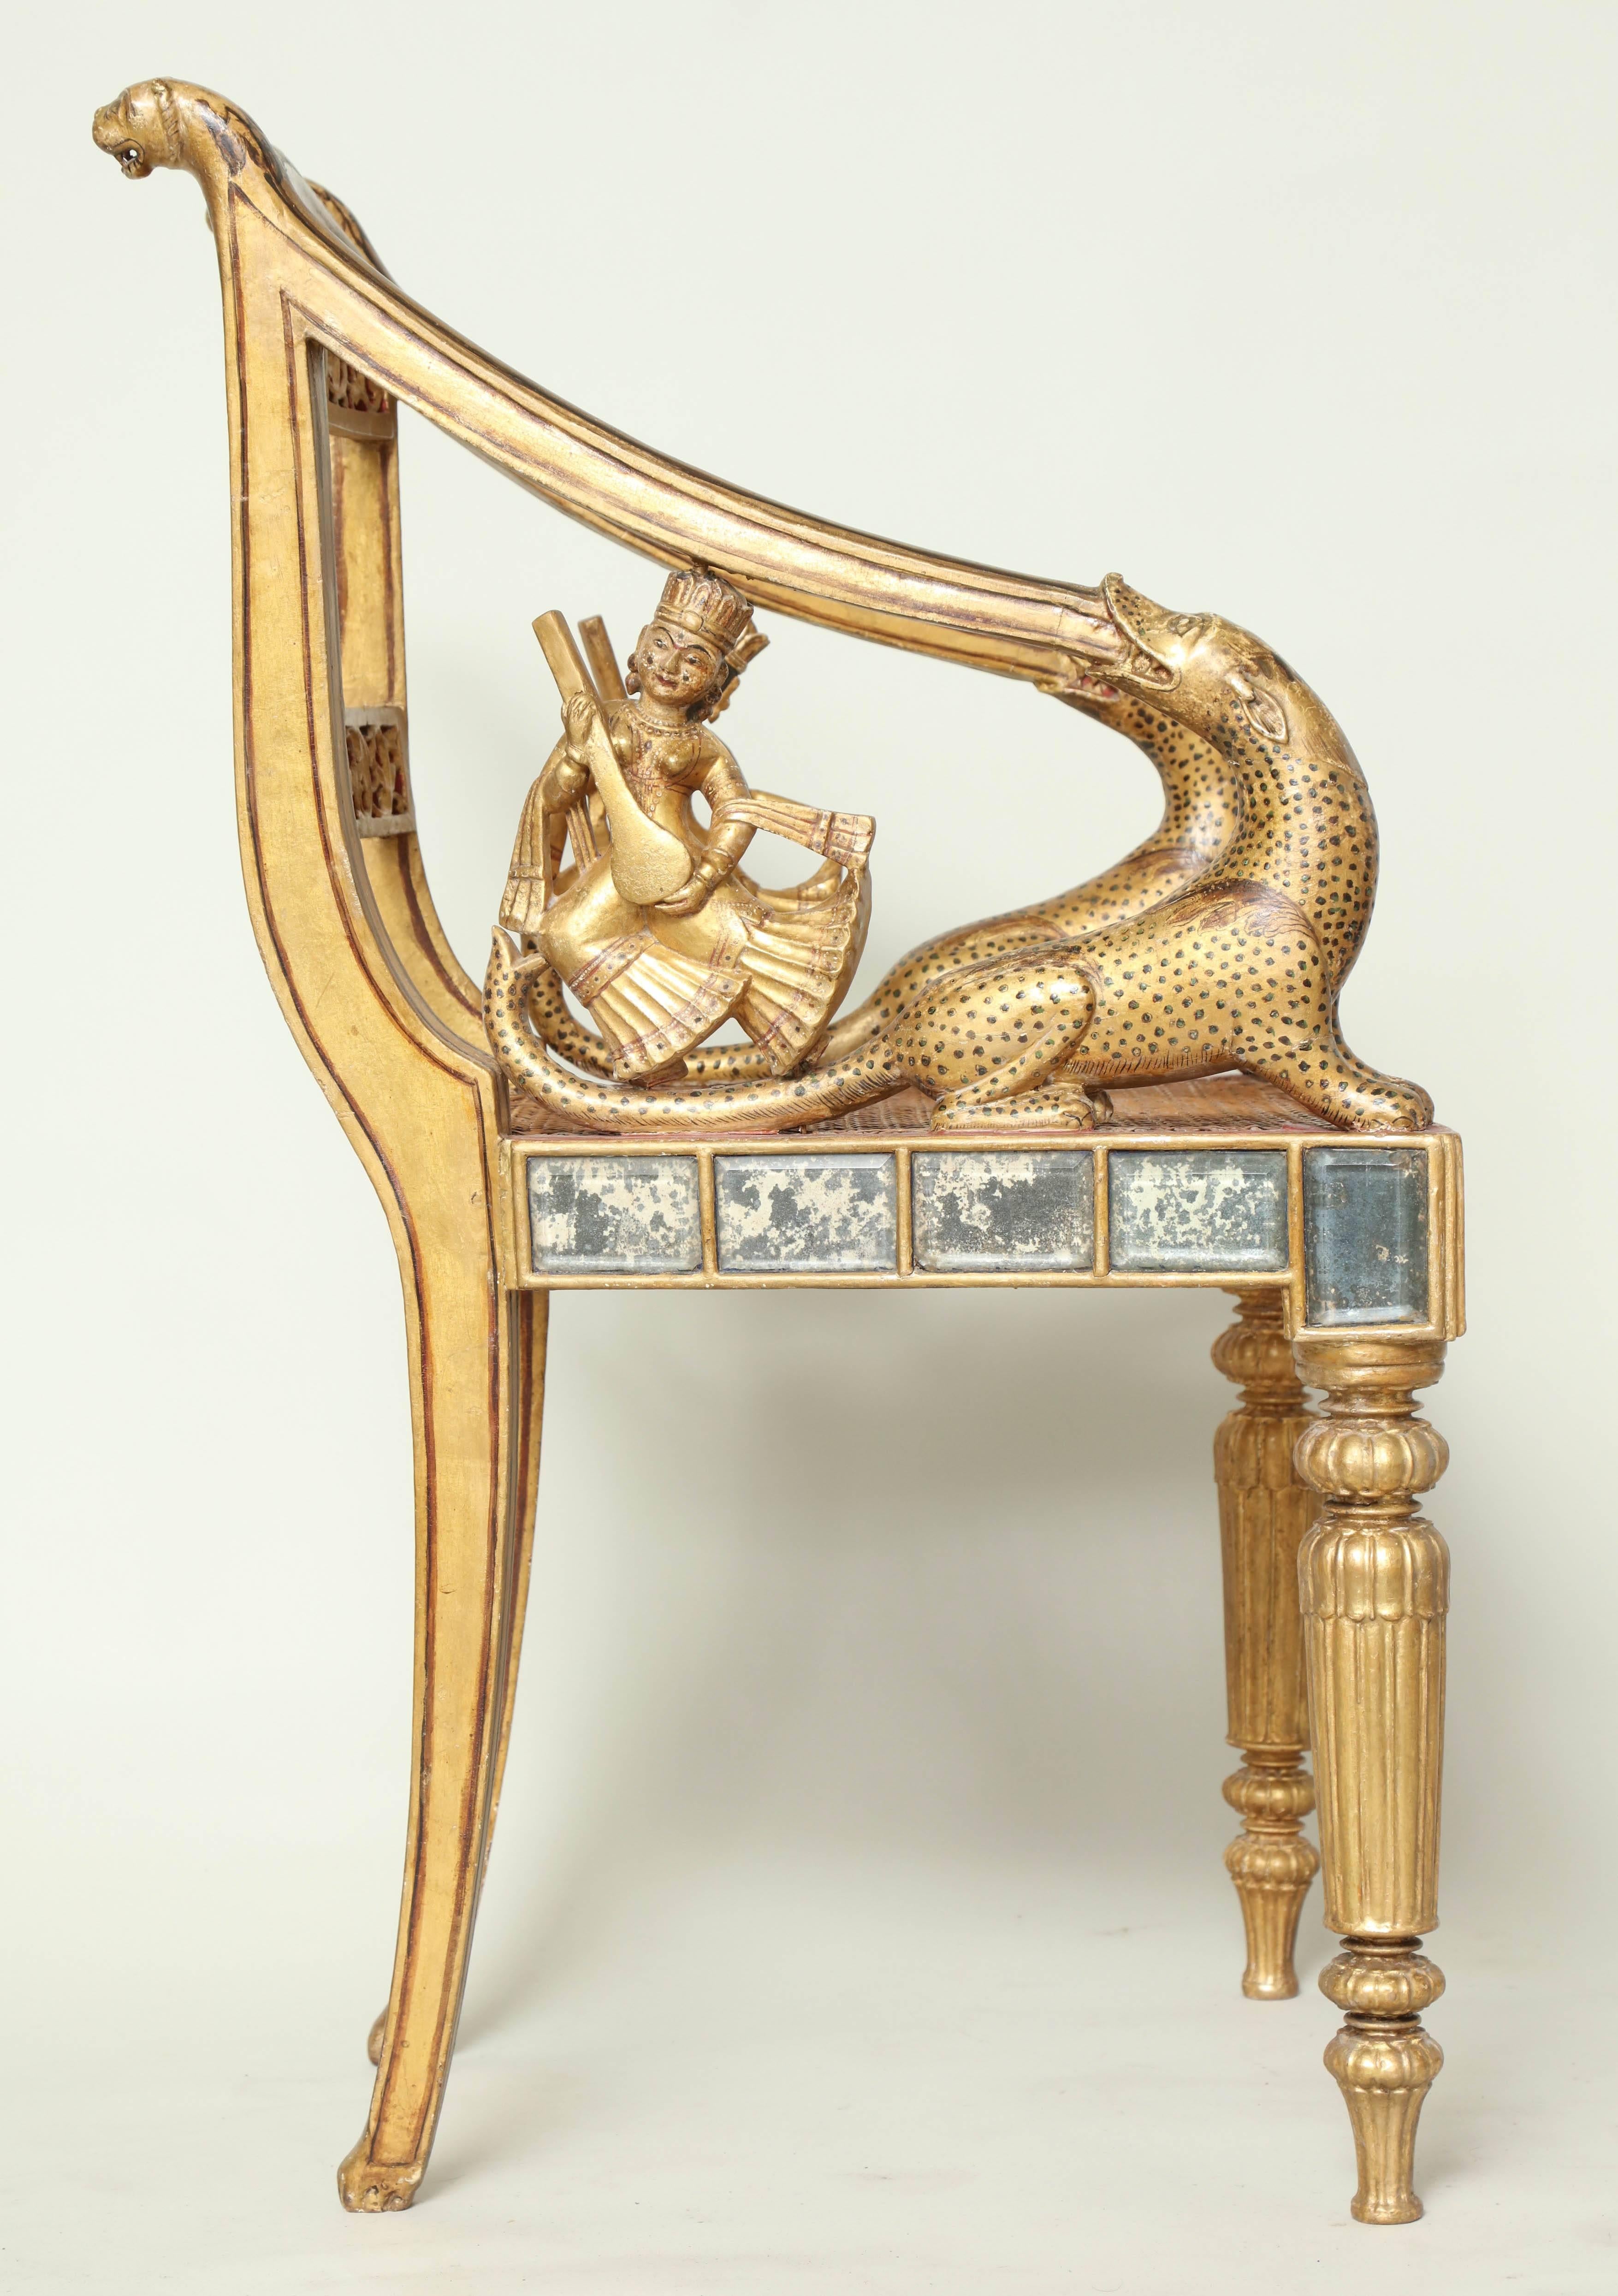 An Anglo-Siamese carved, gilt and painted armchair, having leopard carved arms with sitar playing deities, the pierced back rails with central medallion with deity and surrounding foliate decoration with leopard head tops, over inset bevelled mirror